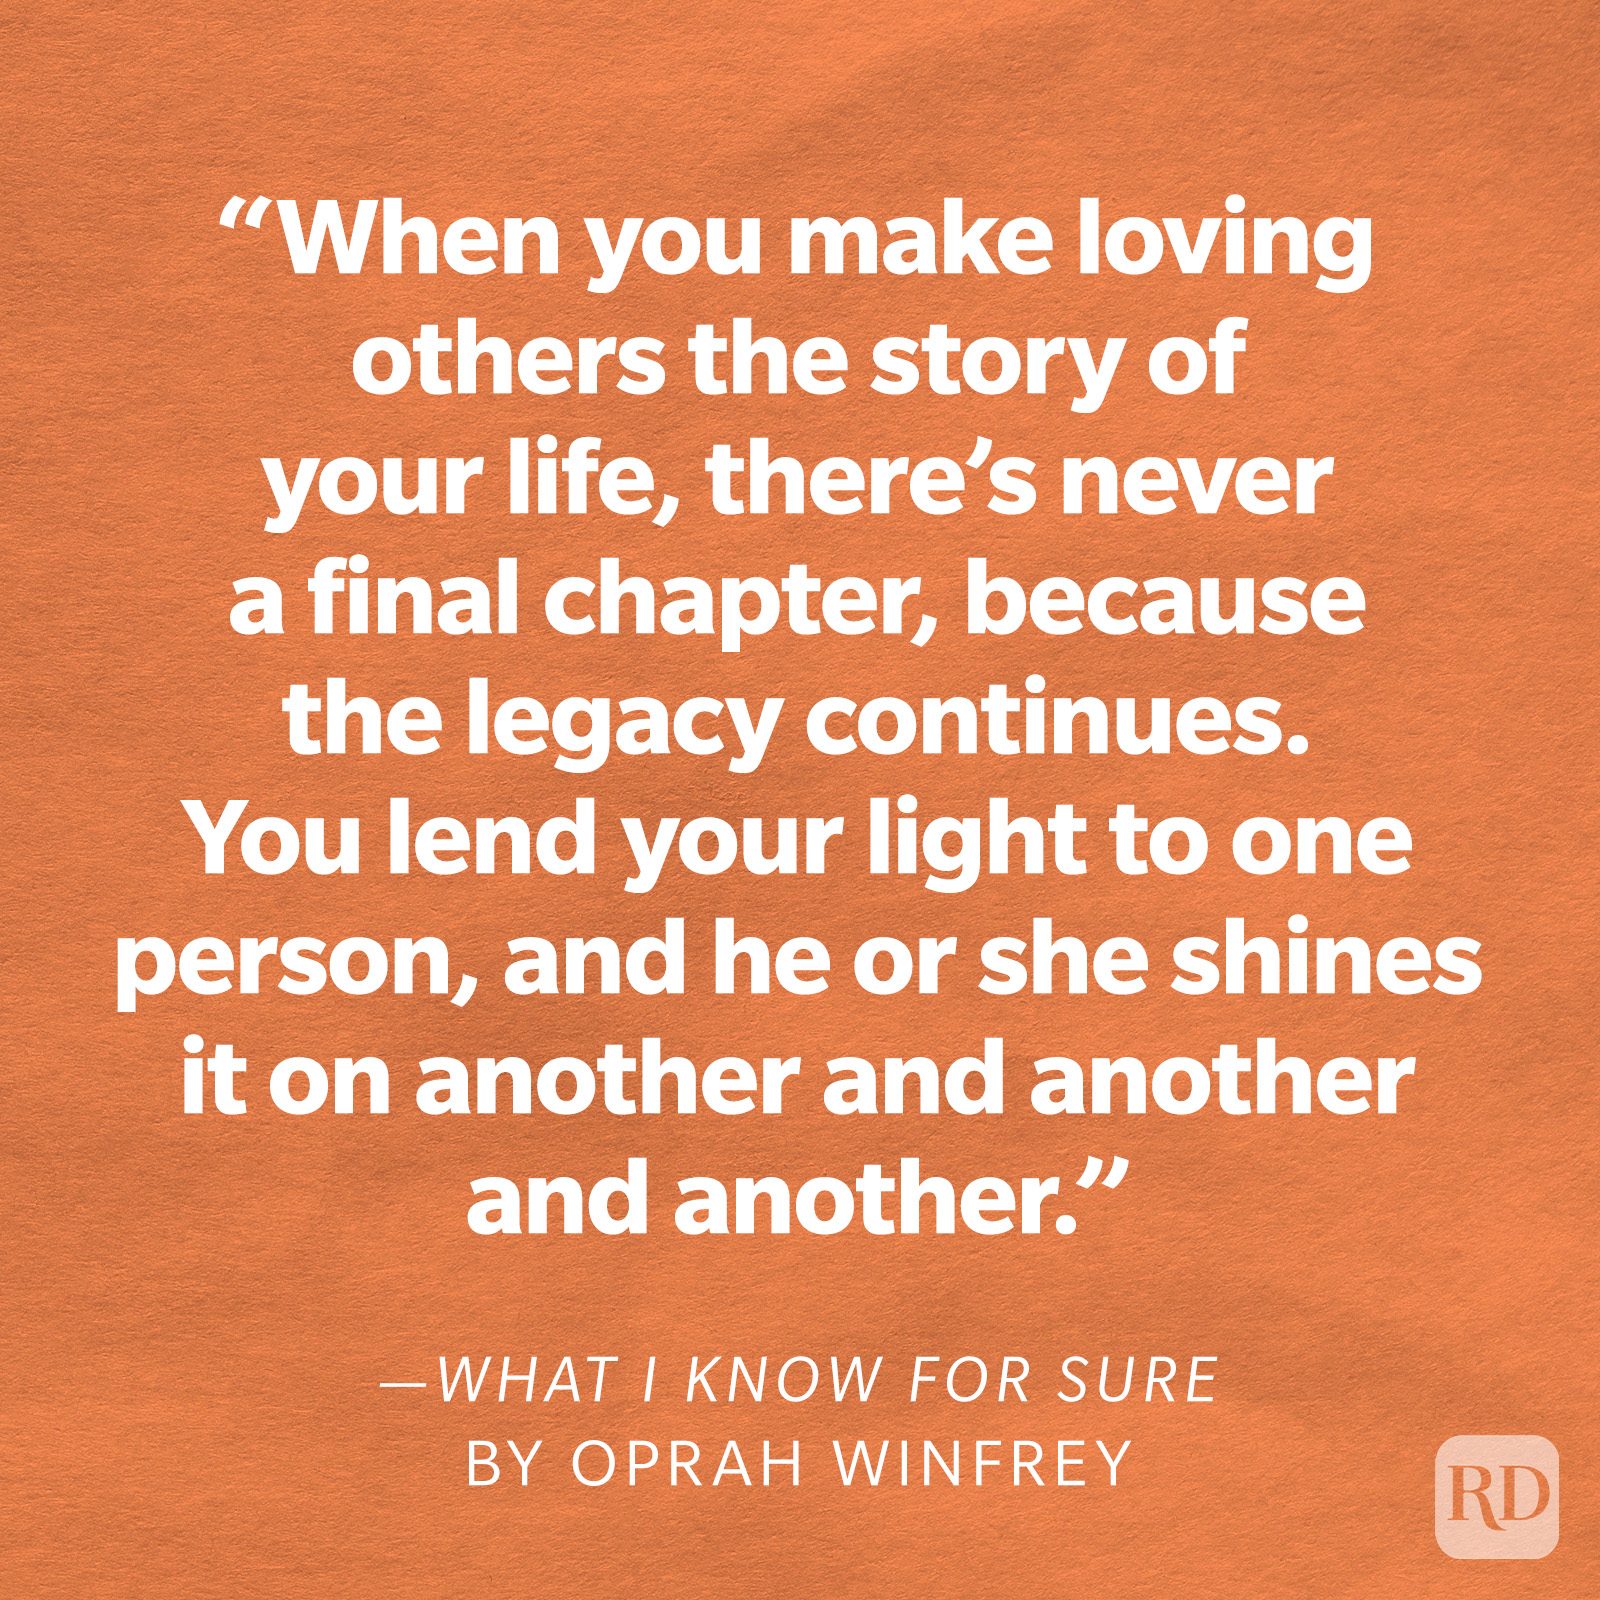 What I Know for Sure by Oprah Winfrey "When you make loving others the story of your life, there's never a final chapter, because the legacy continues. You lend your light to one person, and he or she shines it on another and another and another."